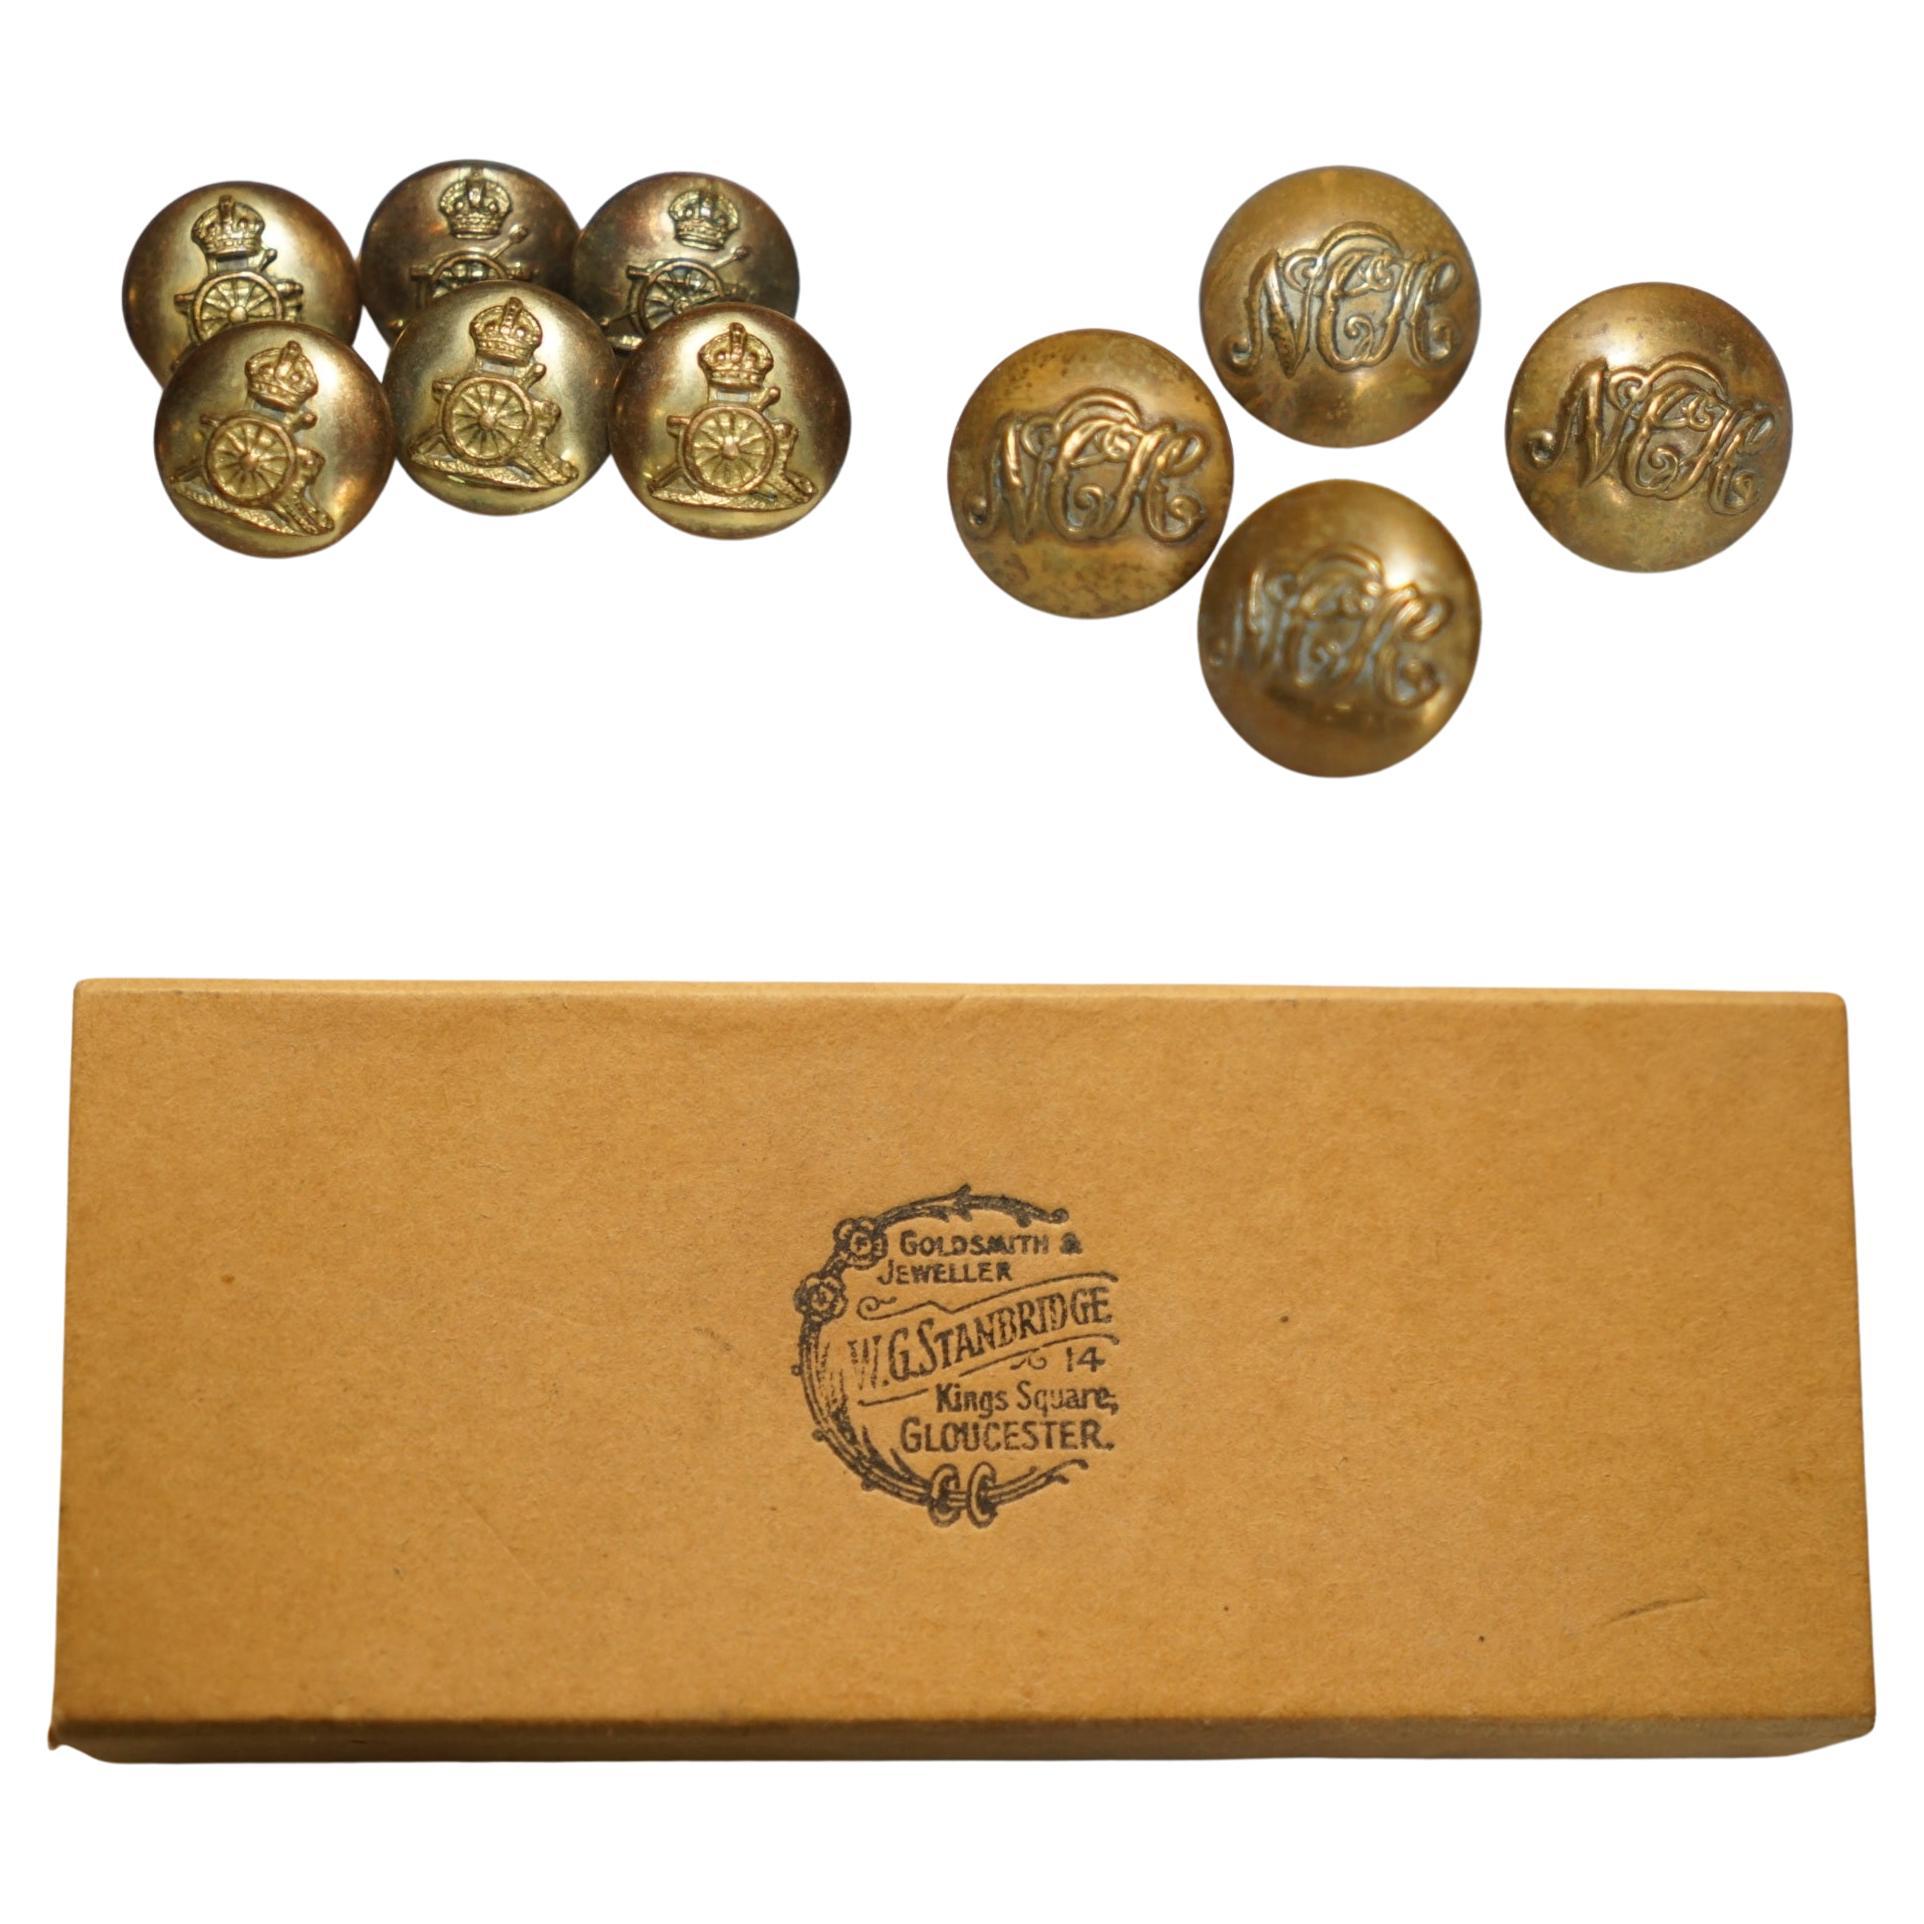 We are delighted to offer for sale this very nice suite of antique military officer Royal Horse Artillery (1 Cannon - 1873-1901) 18mm ball button with Queen Victoria's Crown brass Military uniform buttons

A lovely suite with a wonderful patina,